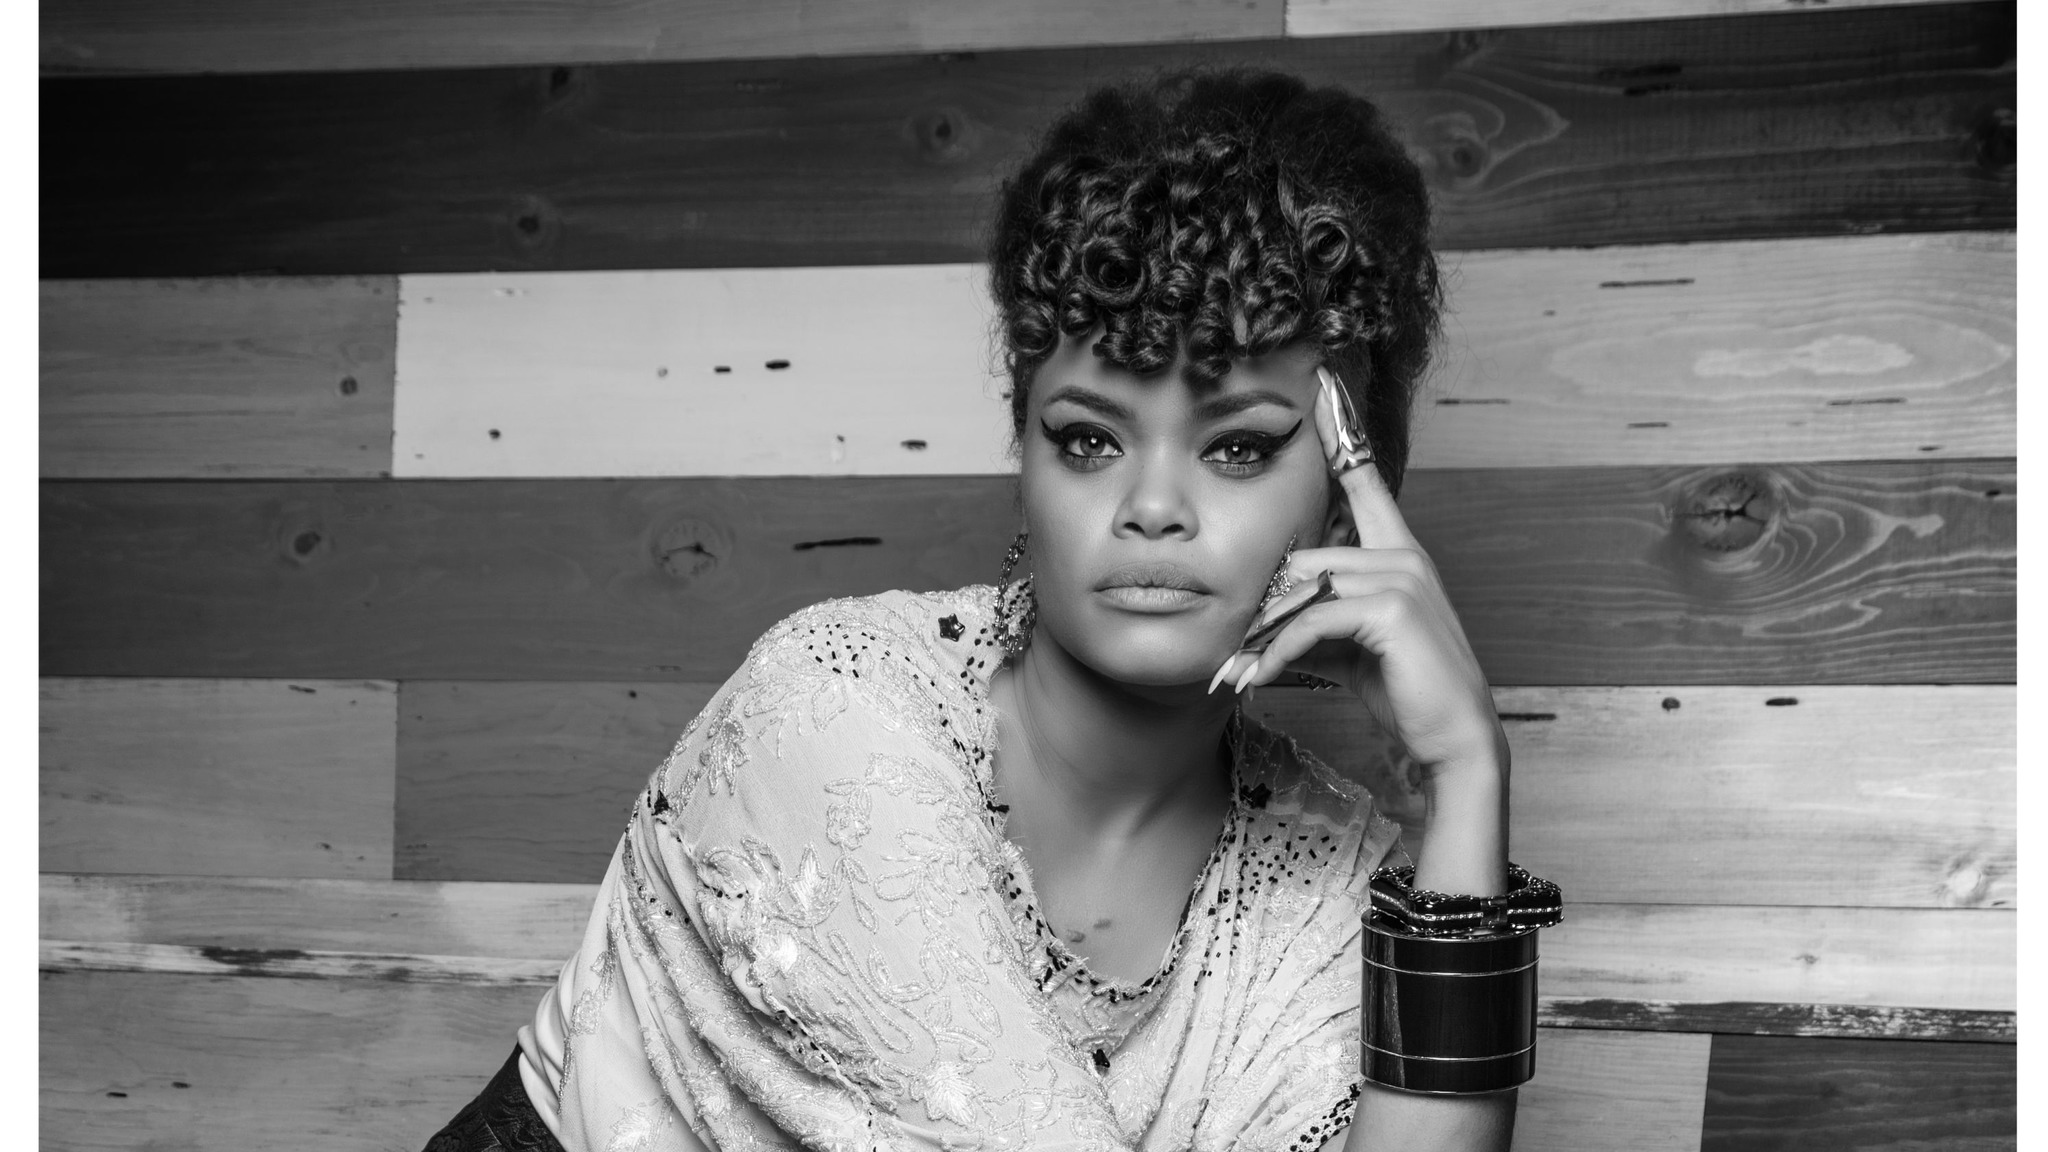 A Conversation With Andra Day